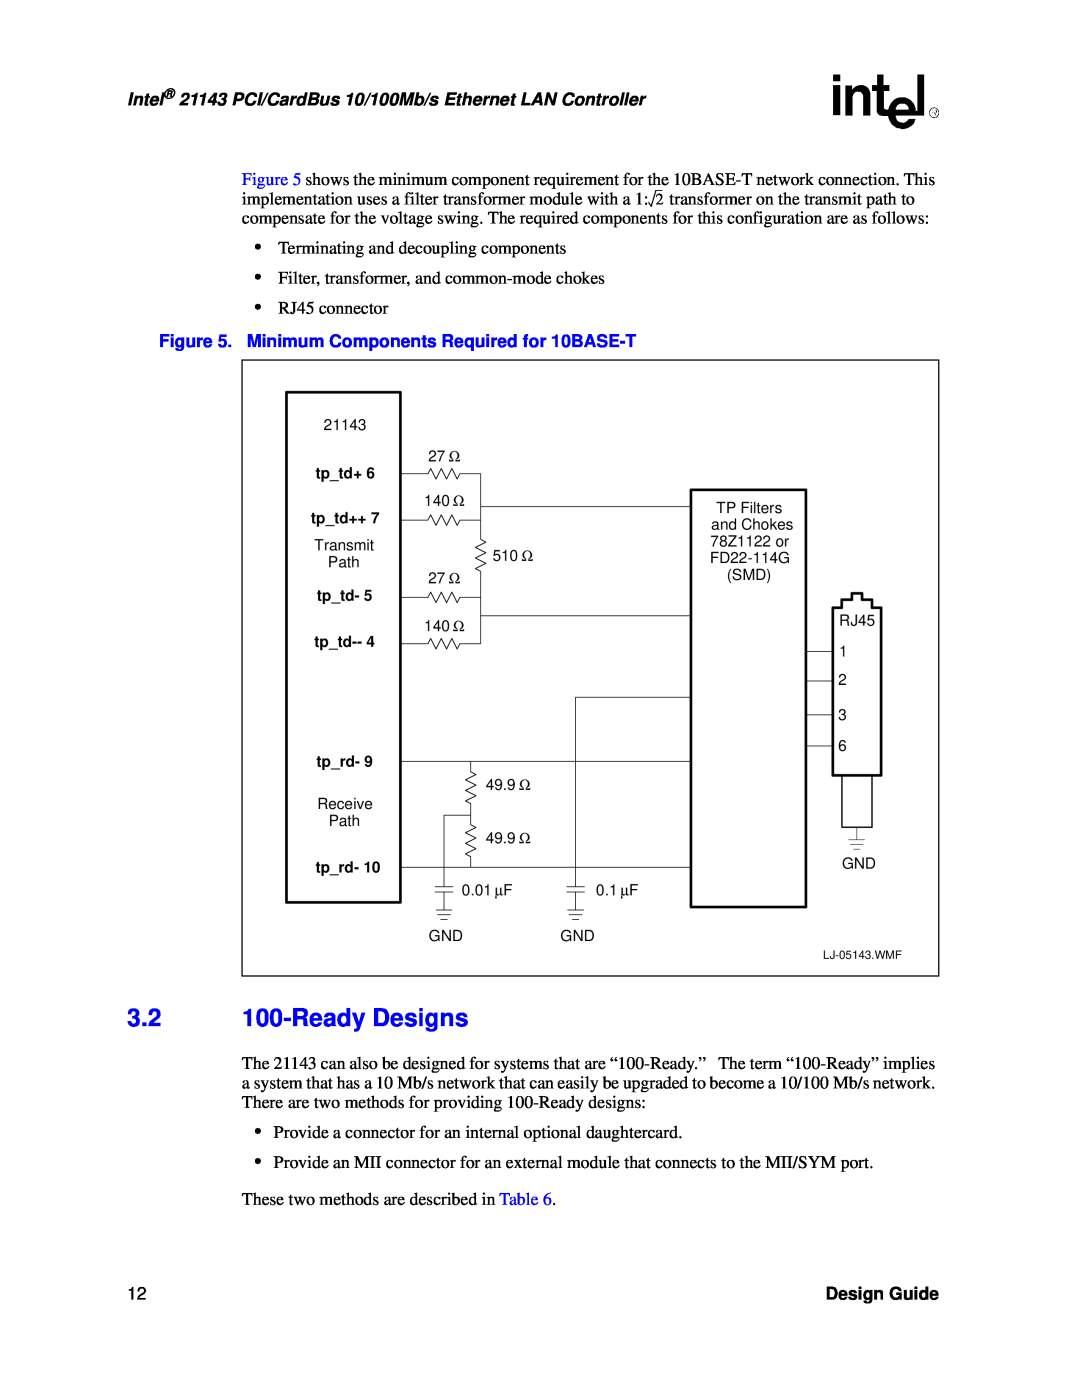 Intel 21143 manual Ready Designs, Minimum Components Required for 10BASE-T, Design Guide 